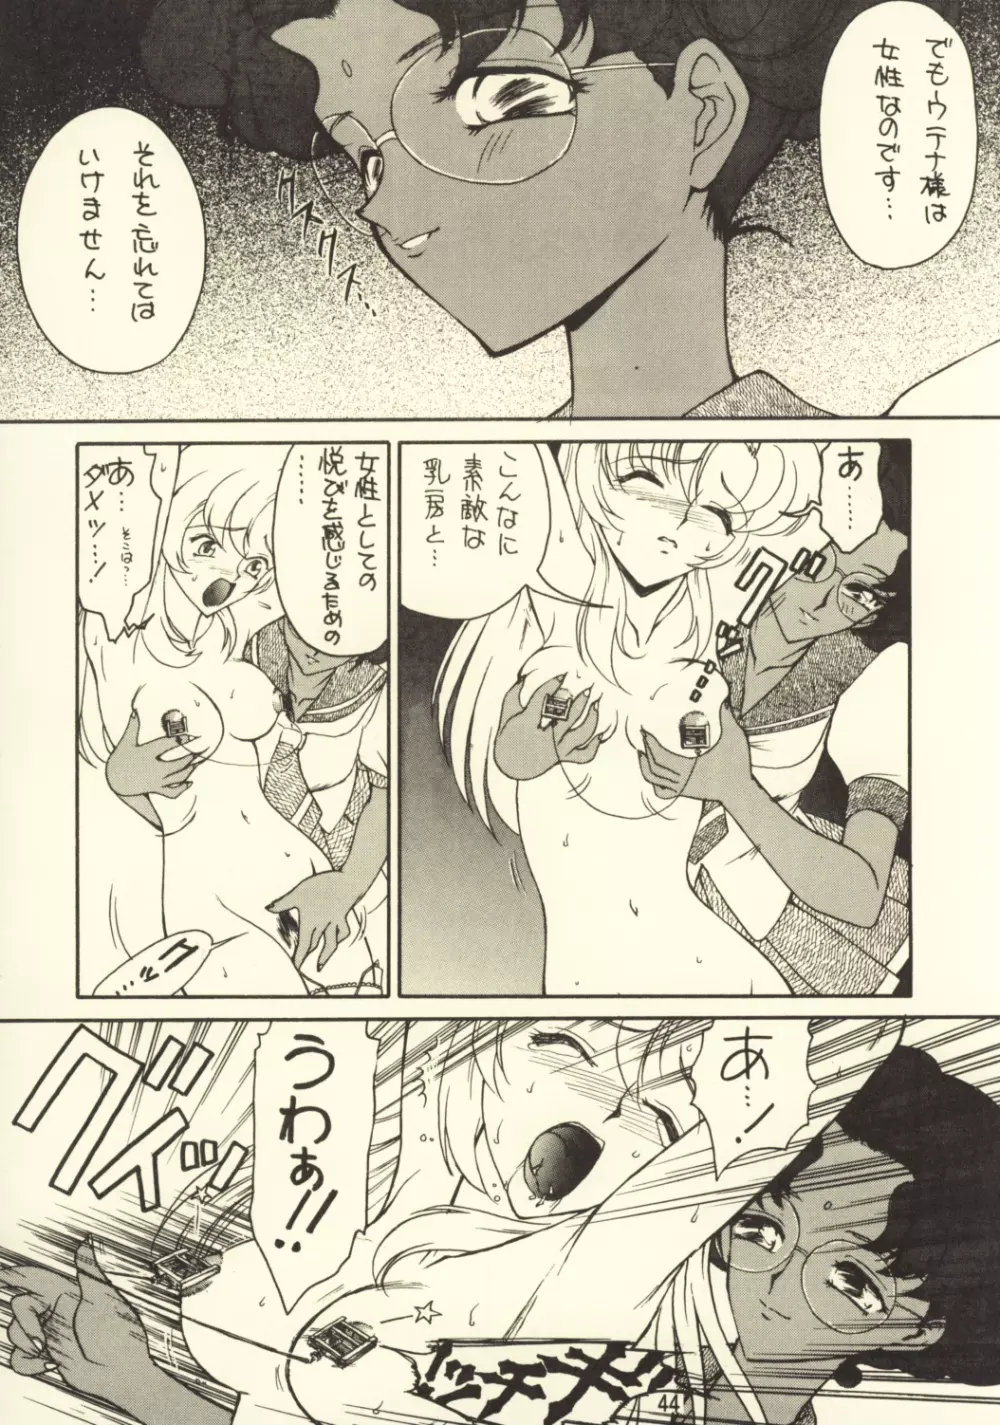 KITSCH 03rd Issue Page.46